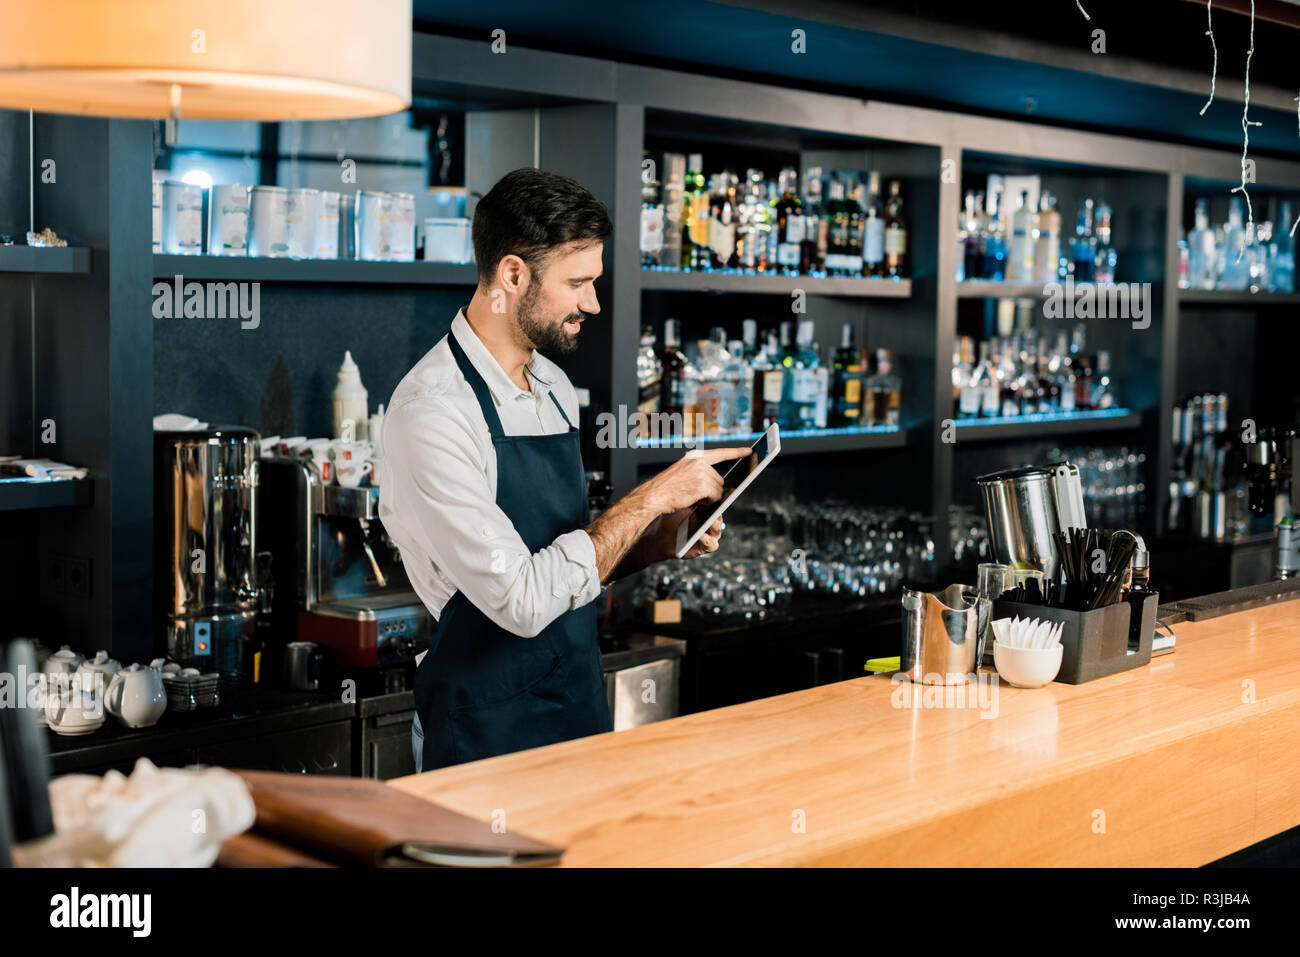 Barman standing in apron and typing on digital tablet Stock Photo